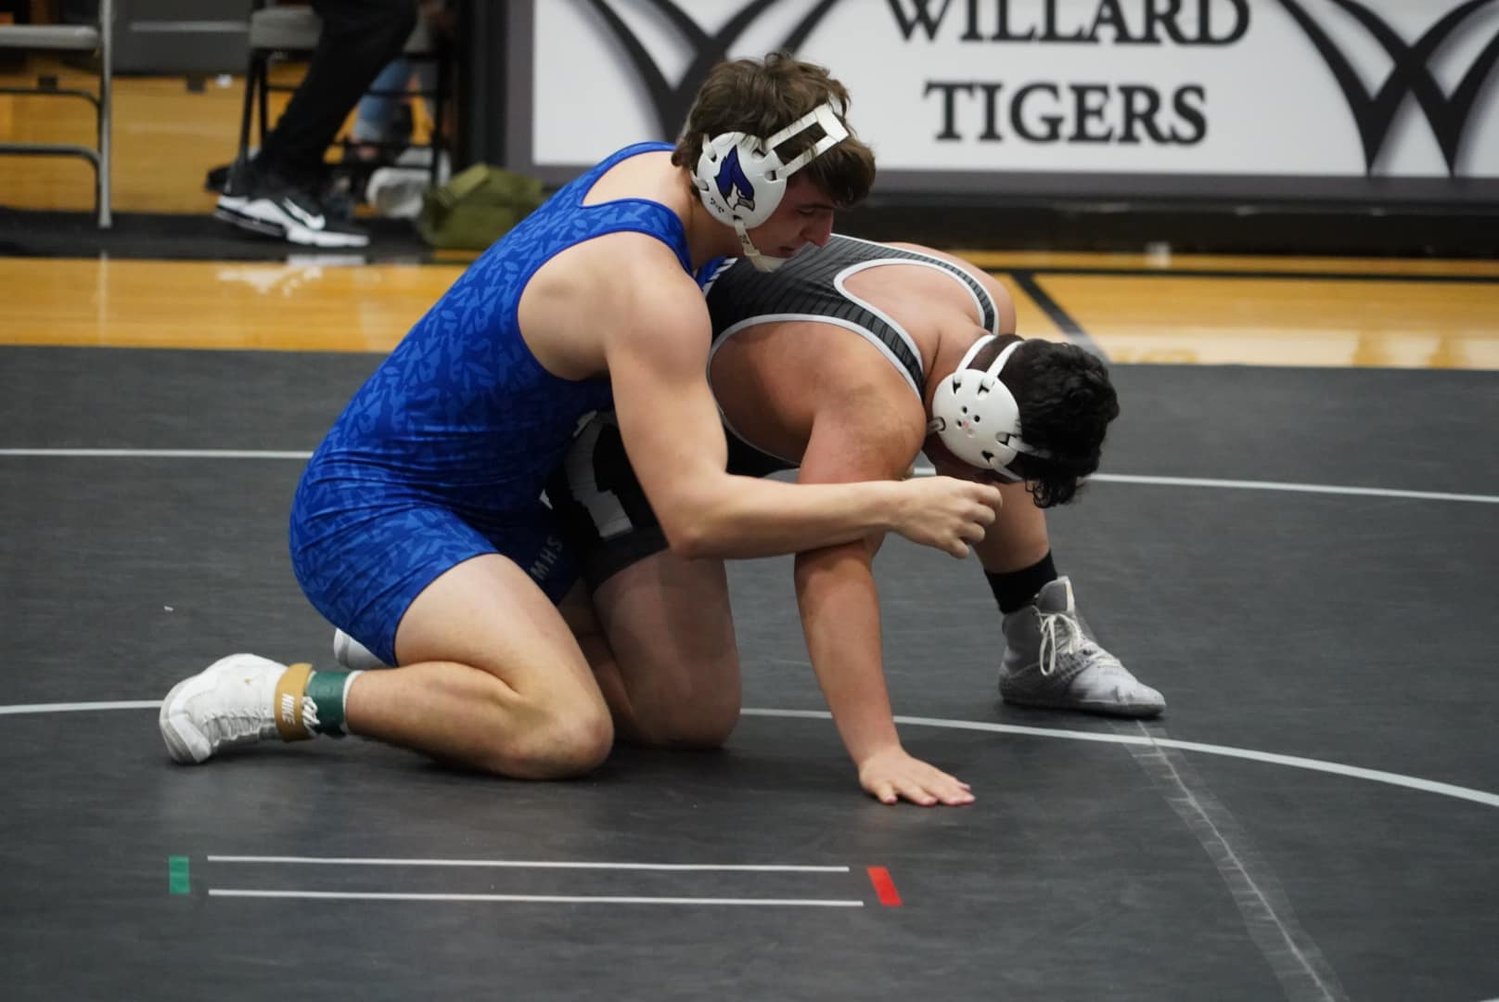 Senior Maguire Wilson during his match in the 285 weight class. Wilson placed 1st and scored 23 team points. The team ended the day 4 points away from receiving a team trophy.